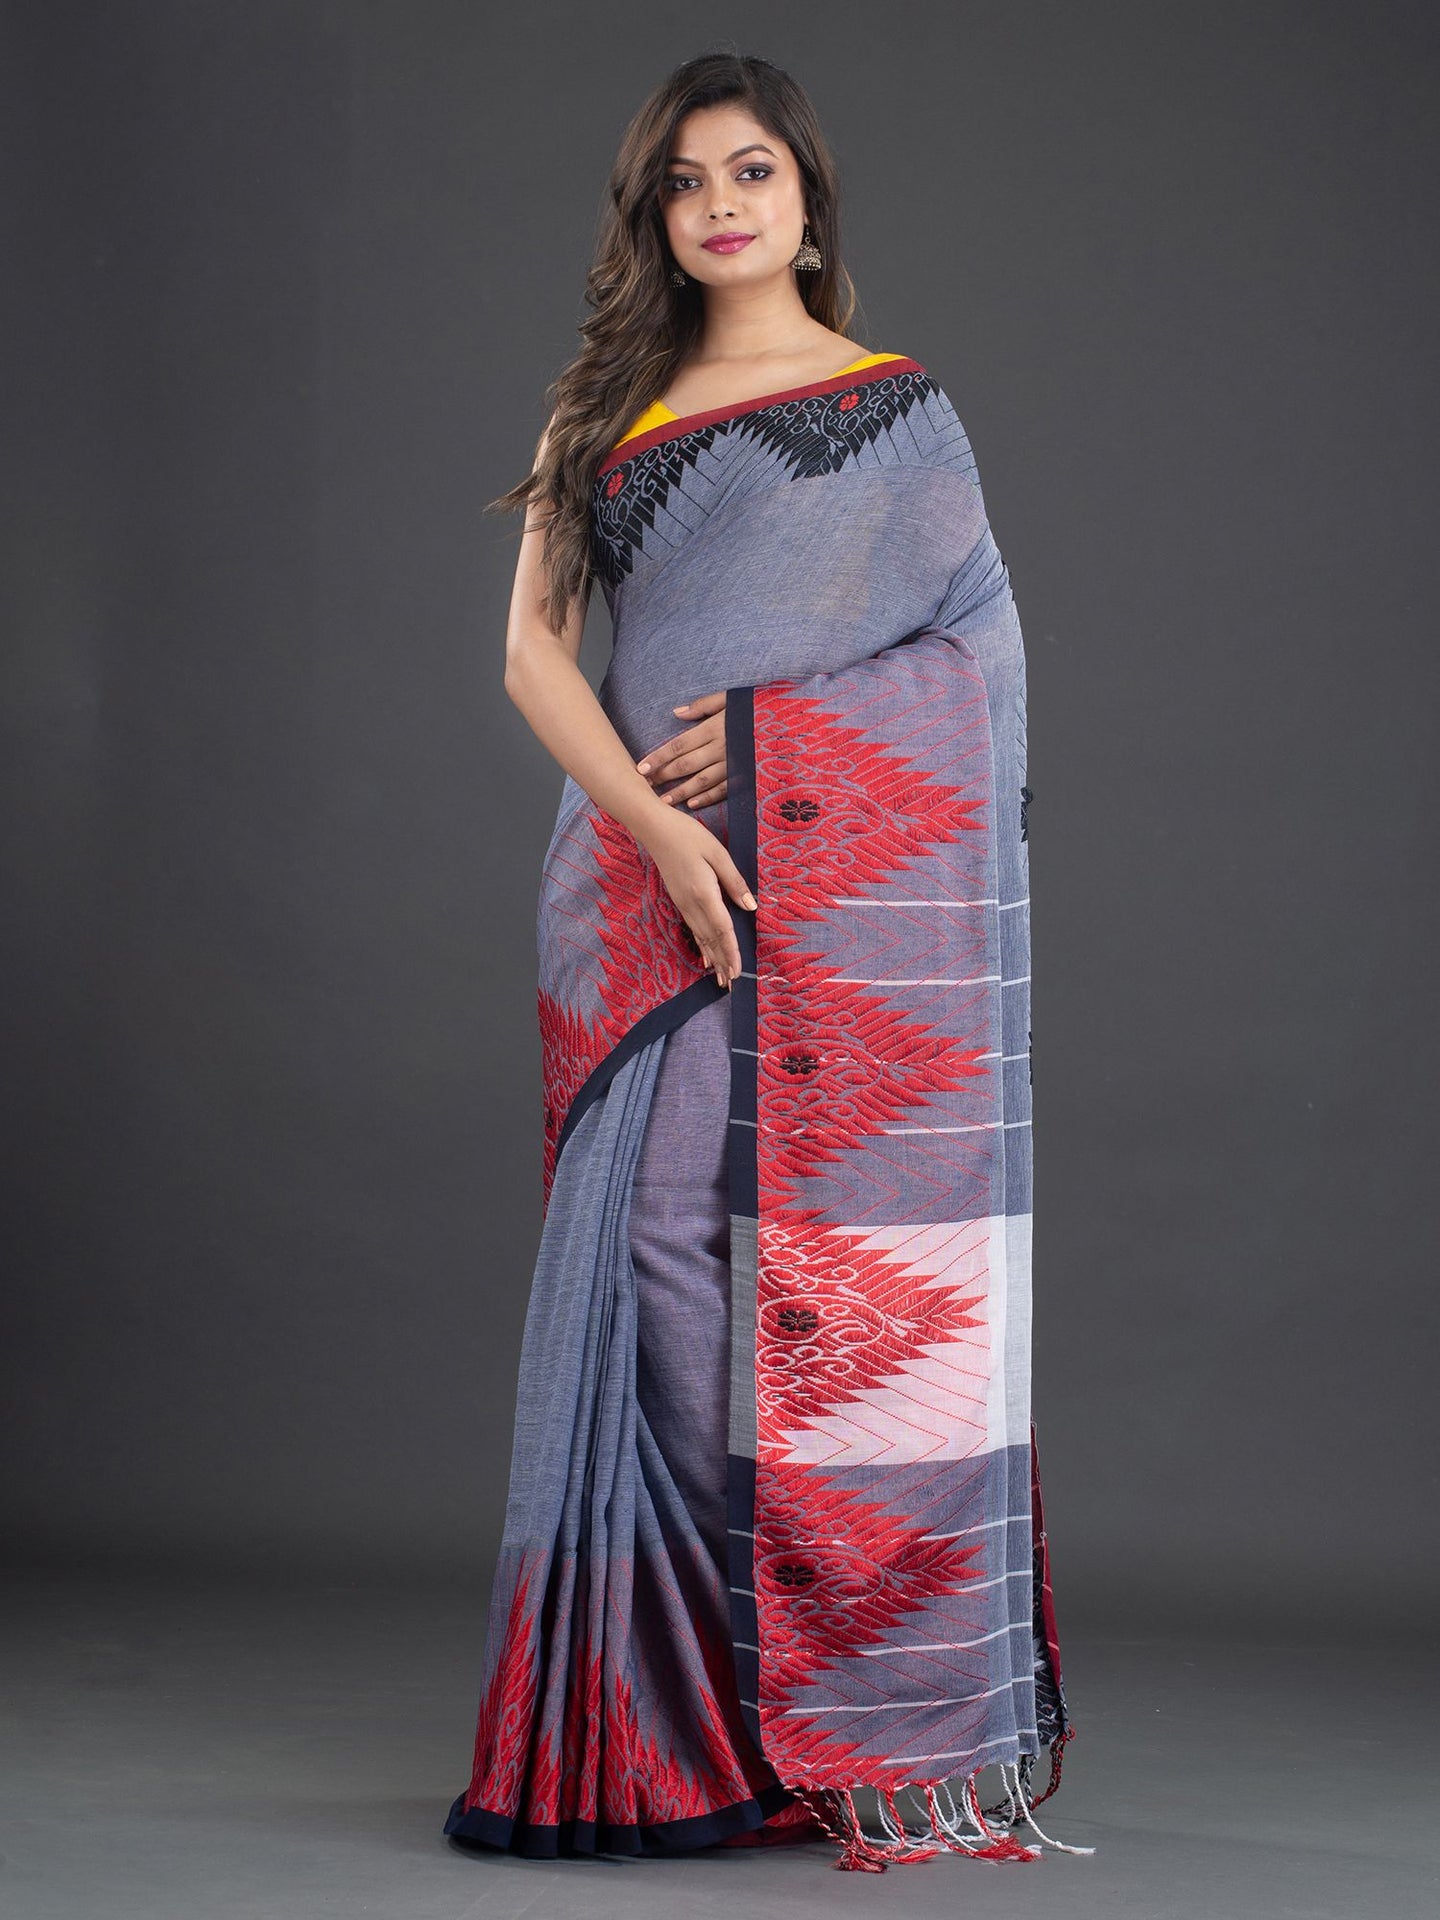 Grey & Red Cotton Saree With Woven Design Border